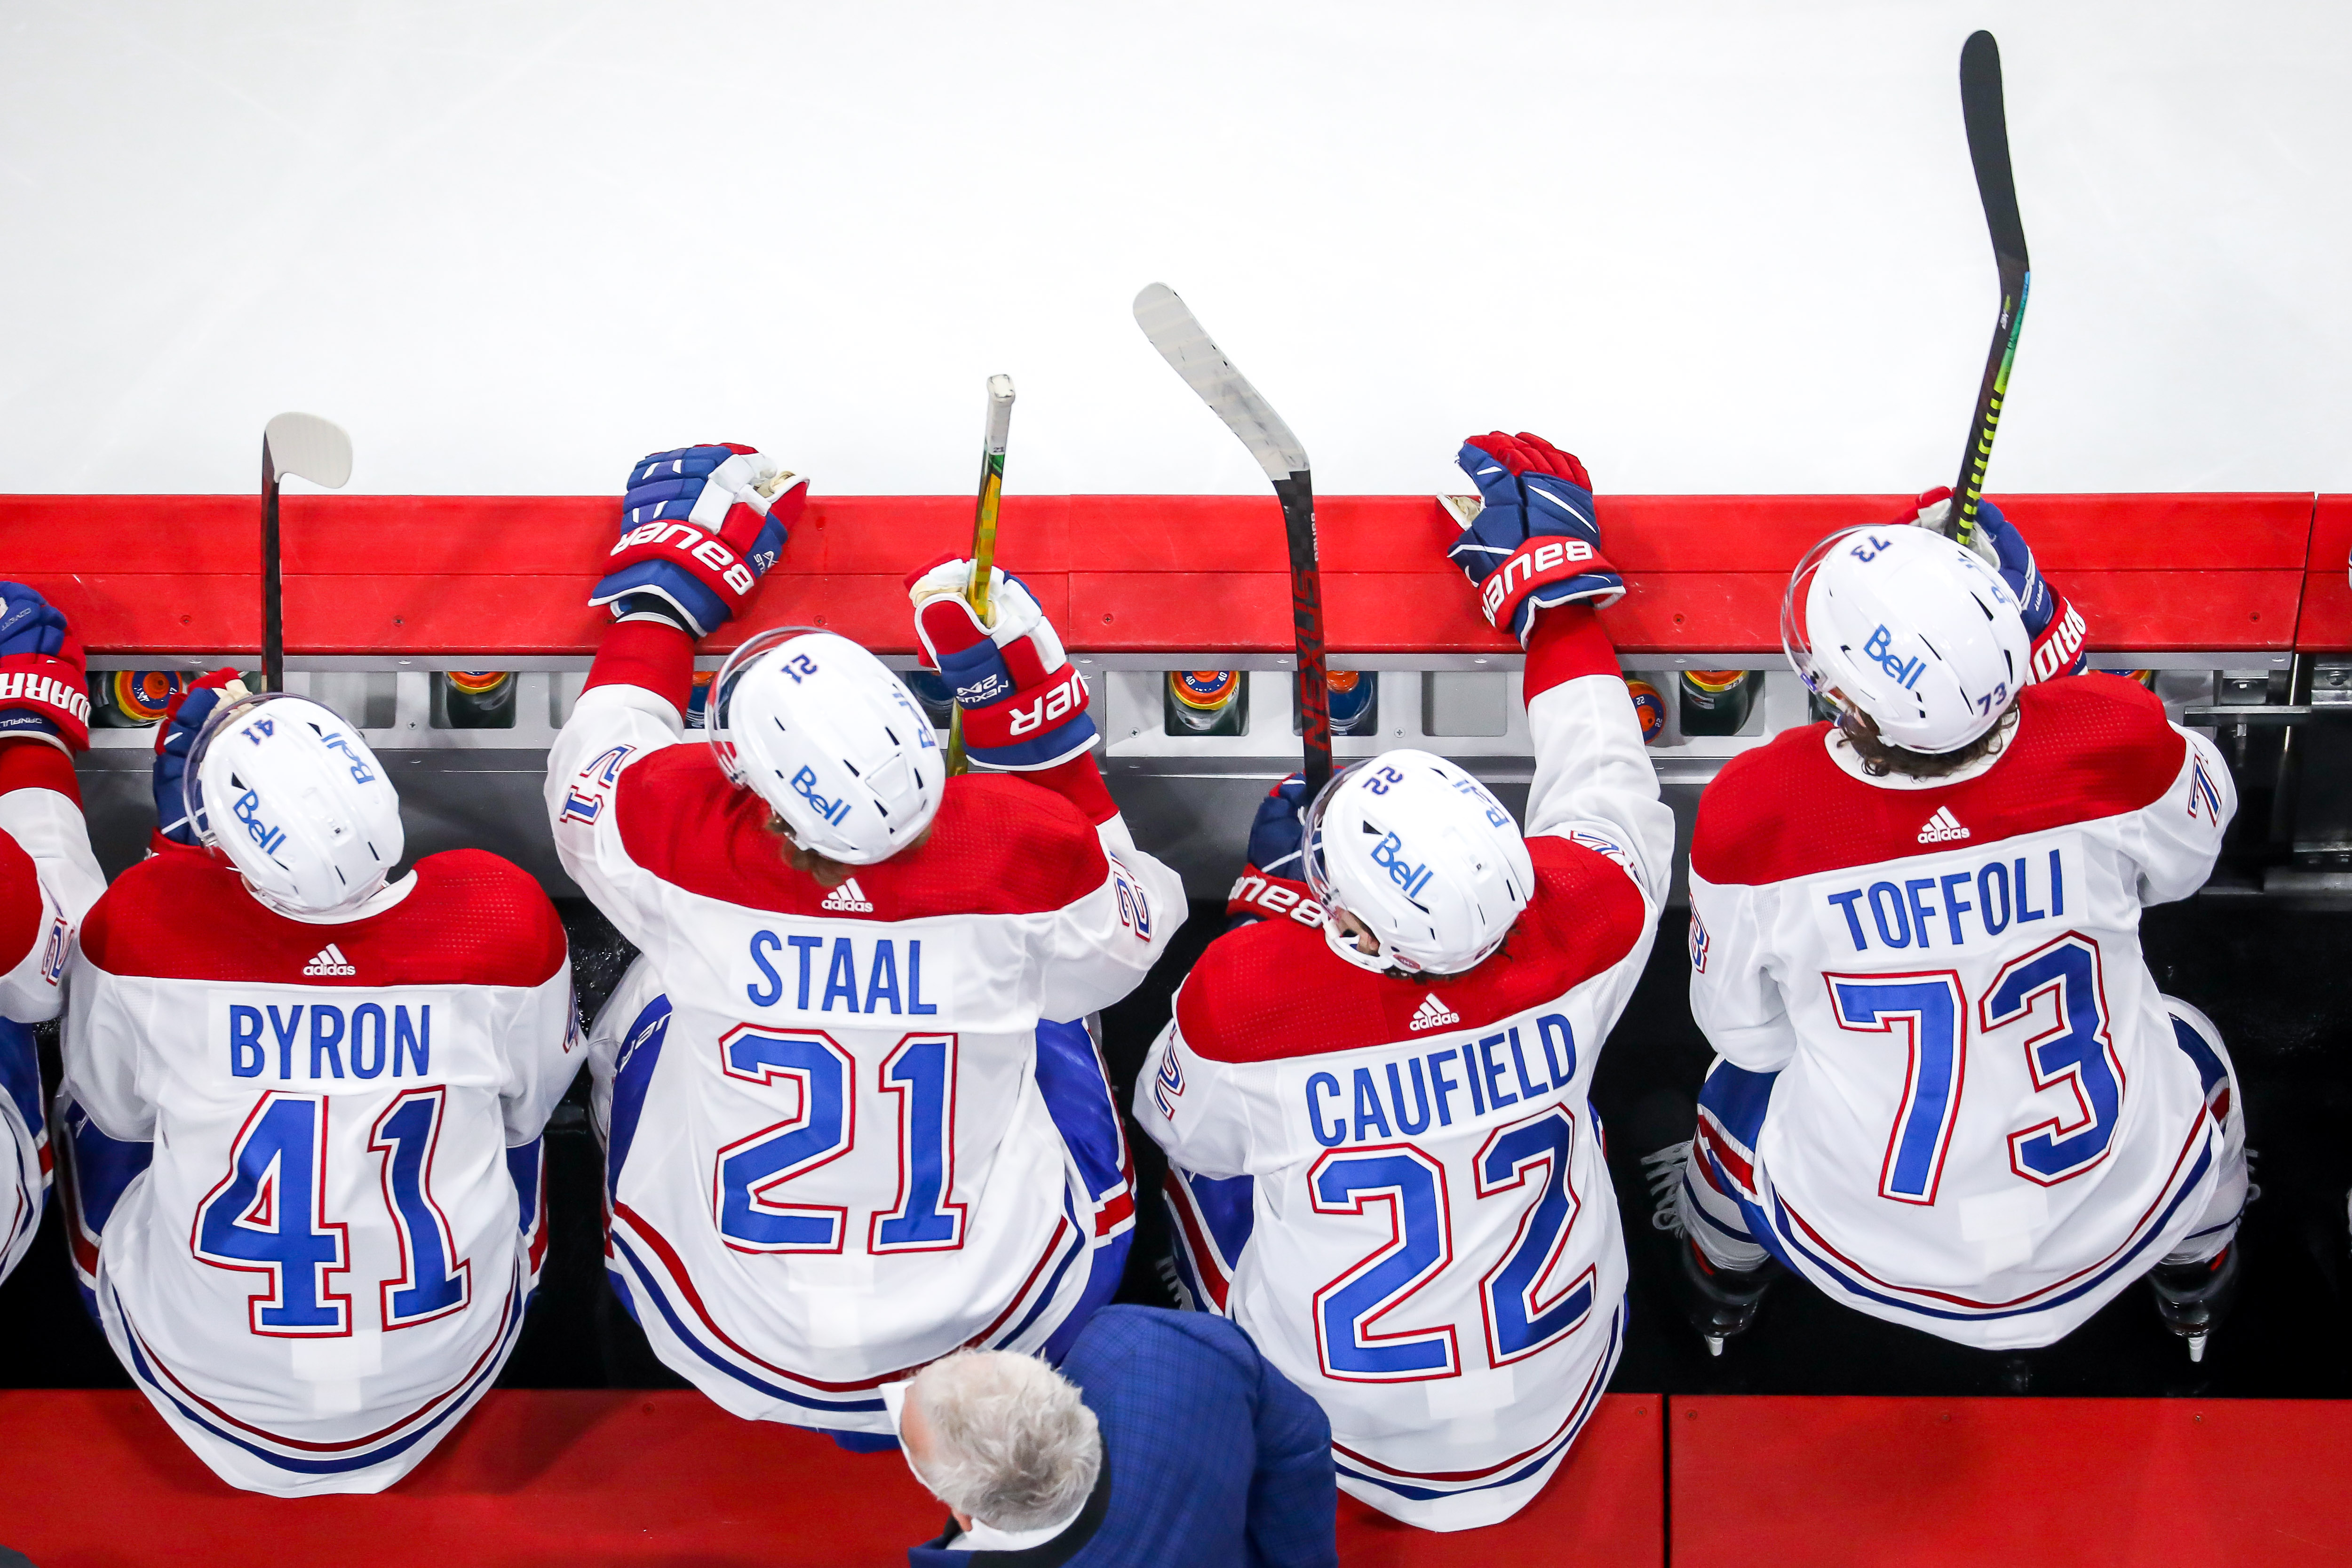 Paul Byron #41, Eric Staal #21, Cole Caufield #22 and Tyler Toffoli #73 of the Montreal Canadiens look on from the bench during third period action against the Winnipeg Jets in Game Two of the Second Round of the 2021 Stanley Cup Playoffs at the Bell MTS Place on June 4, 2021 in Winnipeg, Manitoba, Canada.